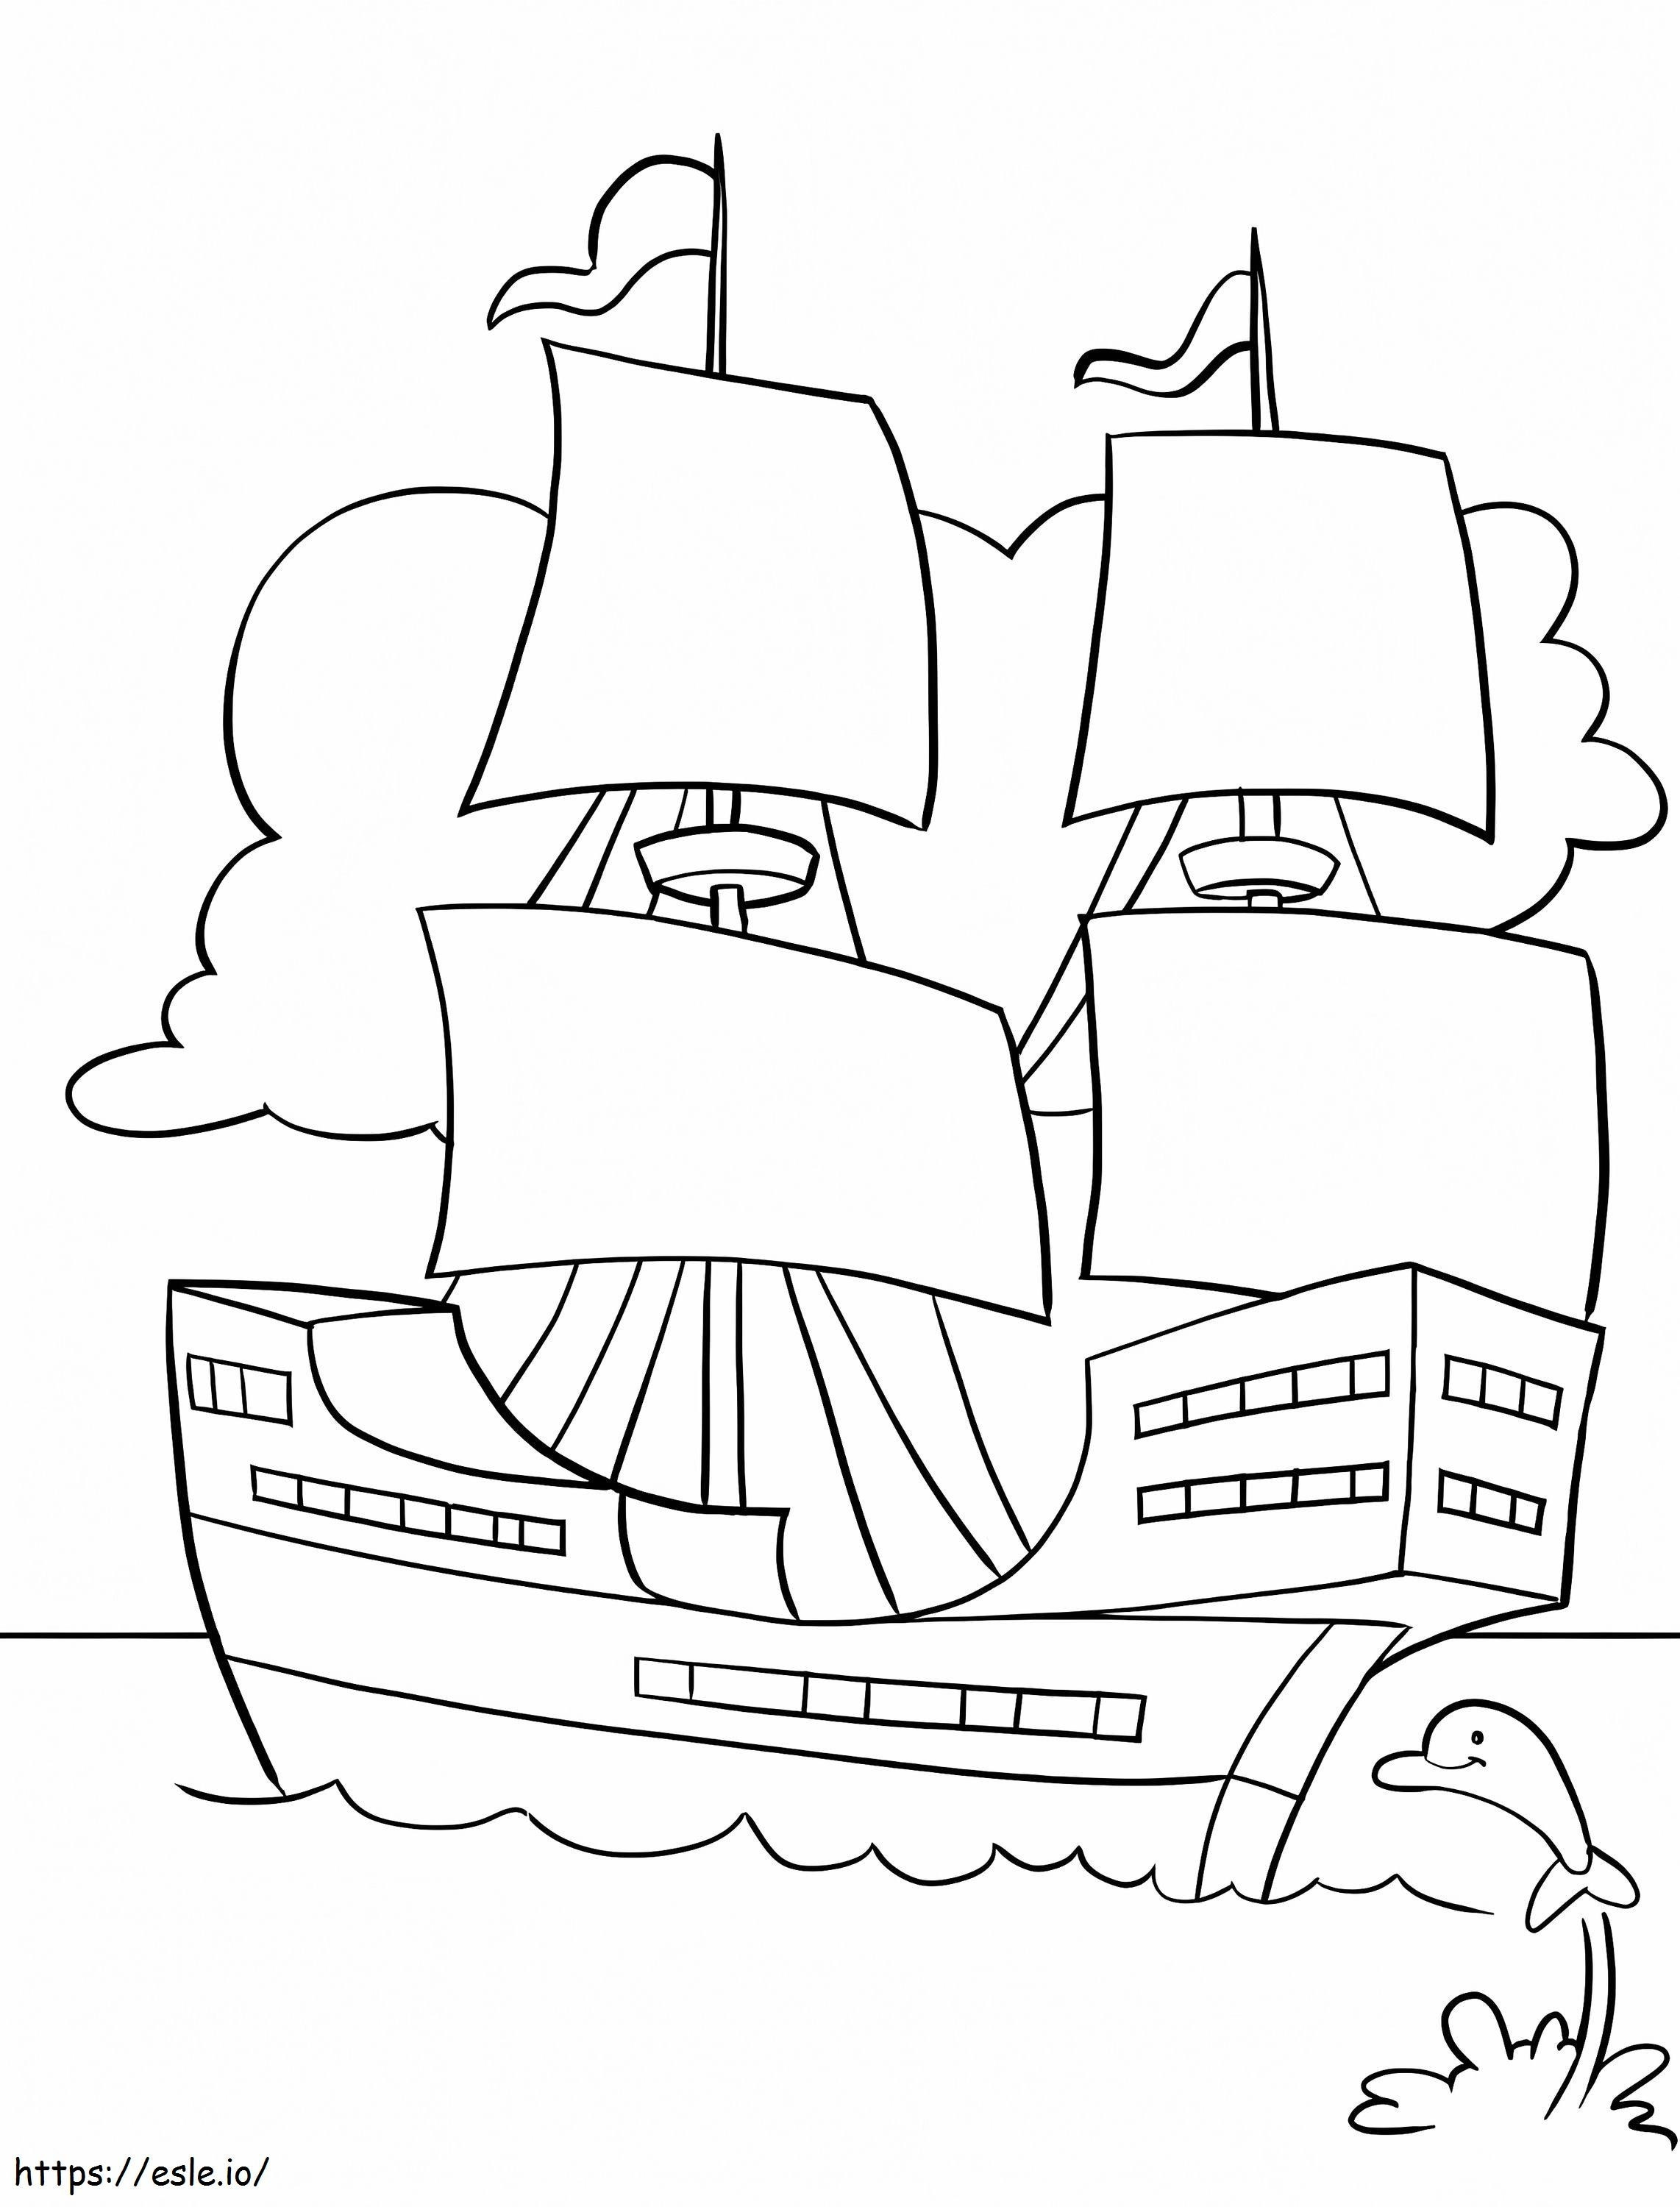 Printable Mayflower coloring page